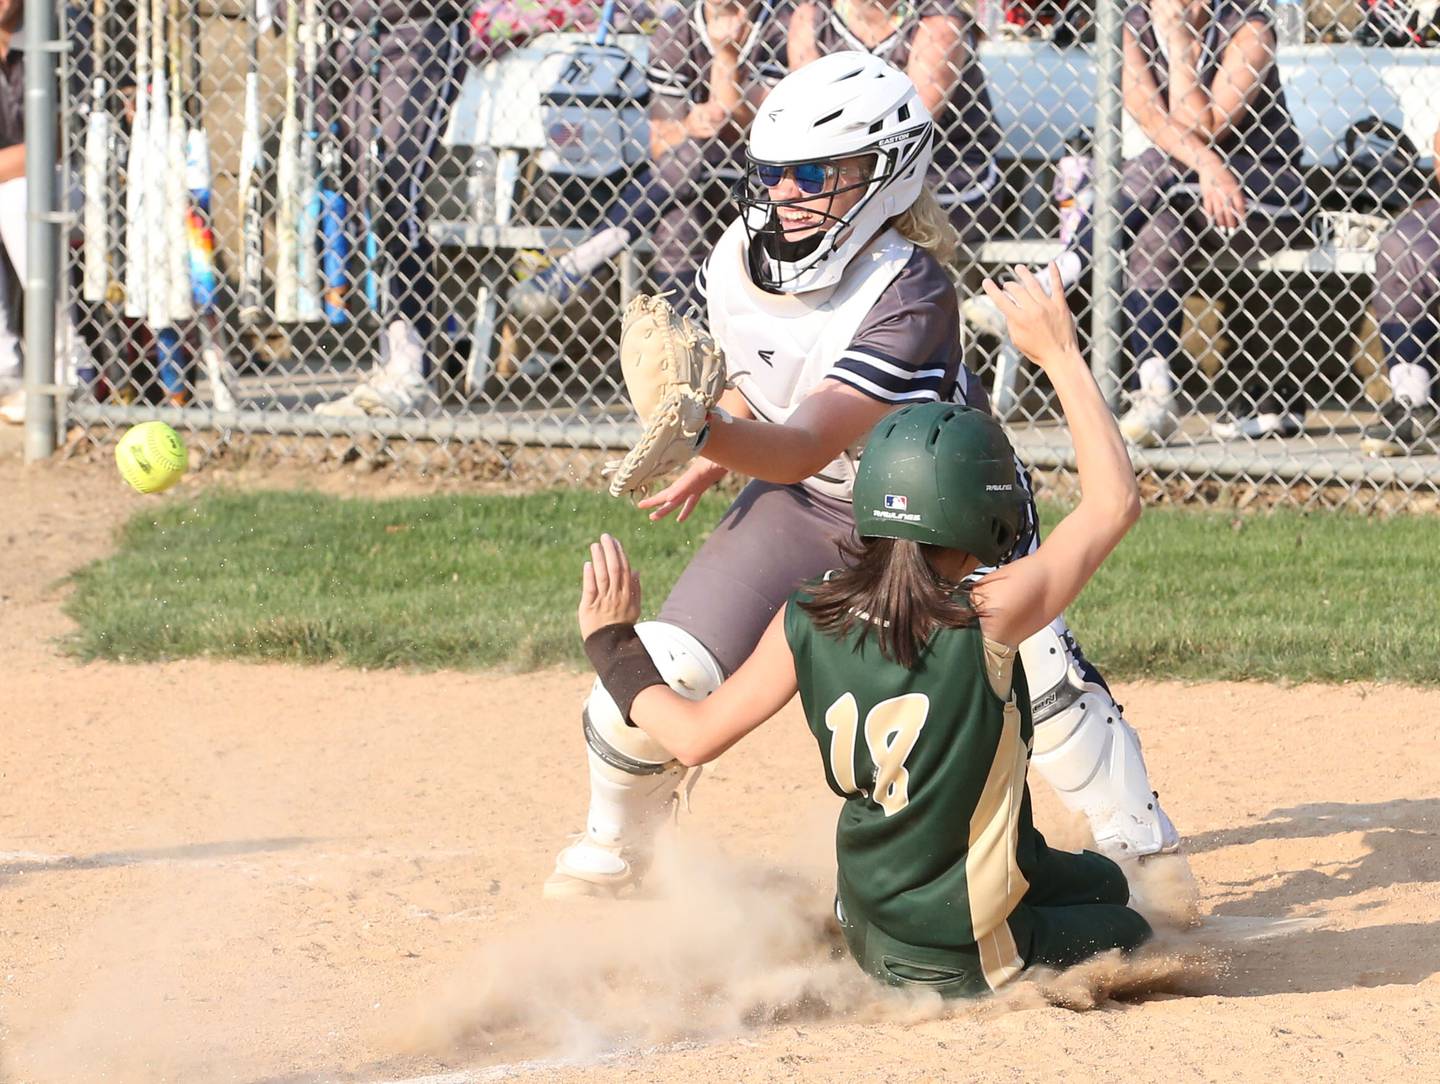 St. Bede's Bailey Engles scores a run as the throw comes in late to Ridgewood AlWood/Cambridge catcher Taylor Pace in the Class 1A Sectional semifinal game on Tuesday, May 23, 20223 at St. Bede Academy.